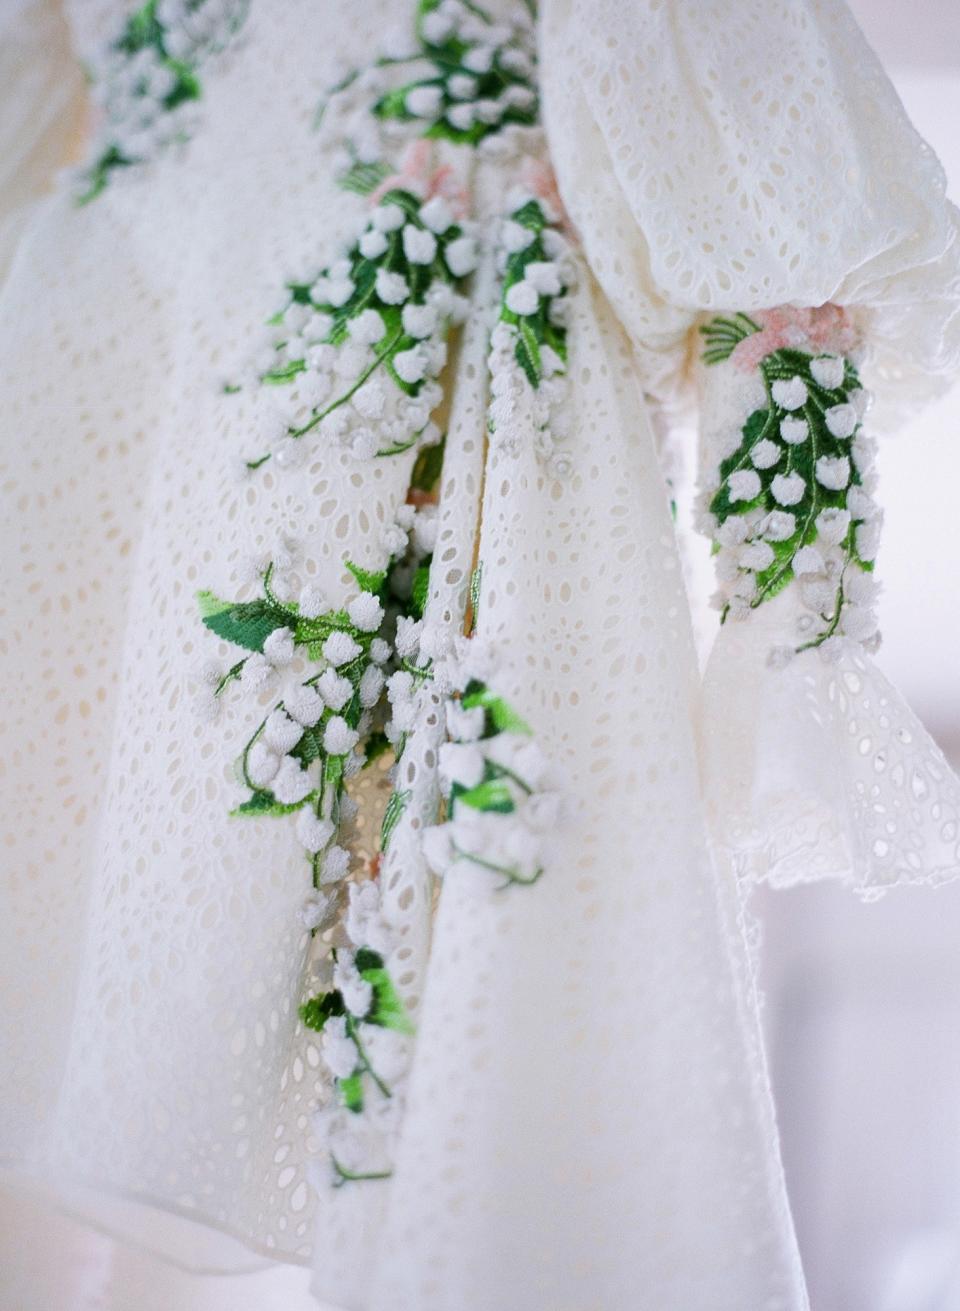 I have always loved the timeless elegance of Giambattista Valli’s designs. Wanting my dress to reflect the romance and ease of the evening, I was immediately drawn to the vintage eyelet lace and hand-embroidered lily of the valley. It was me in a dress!